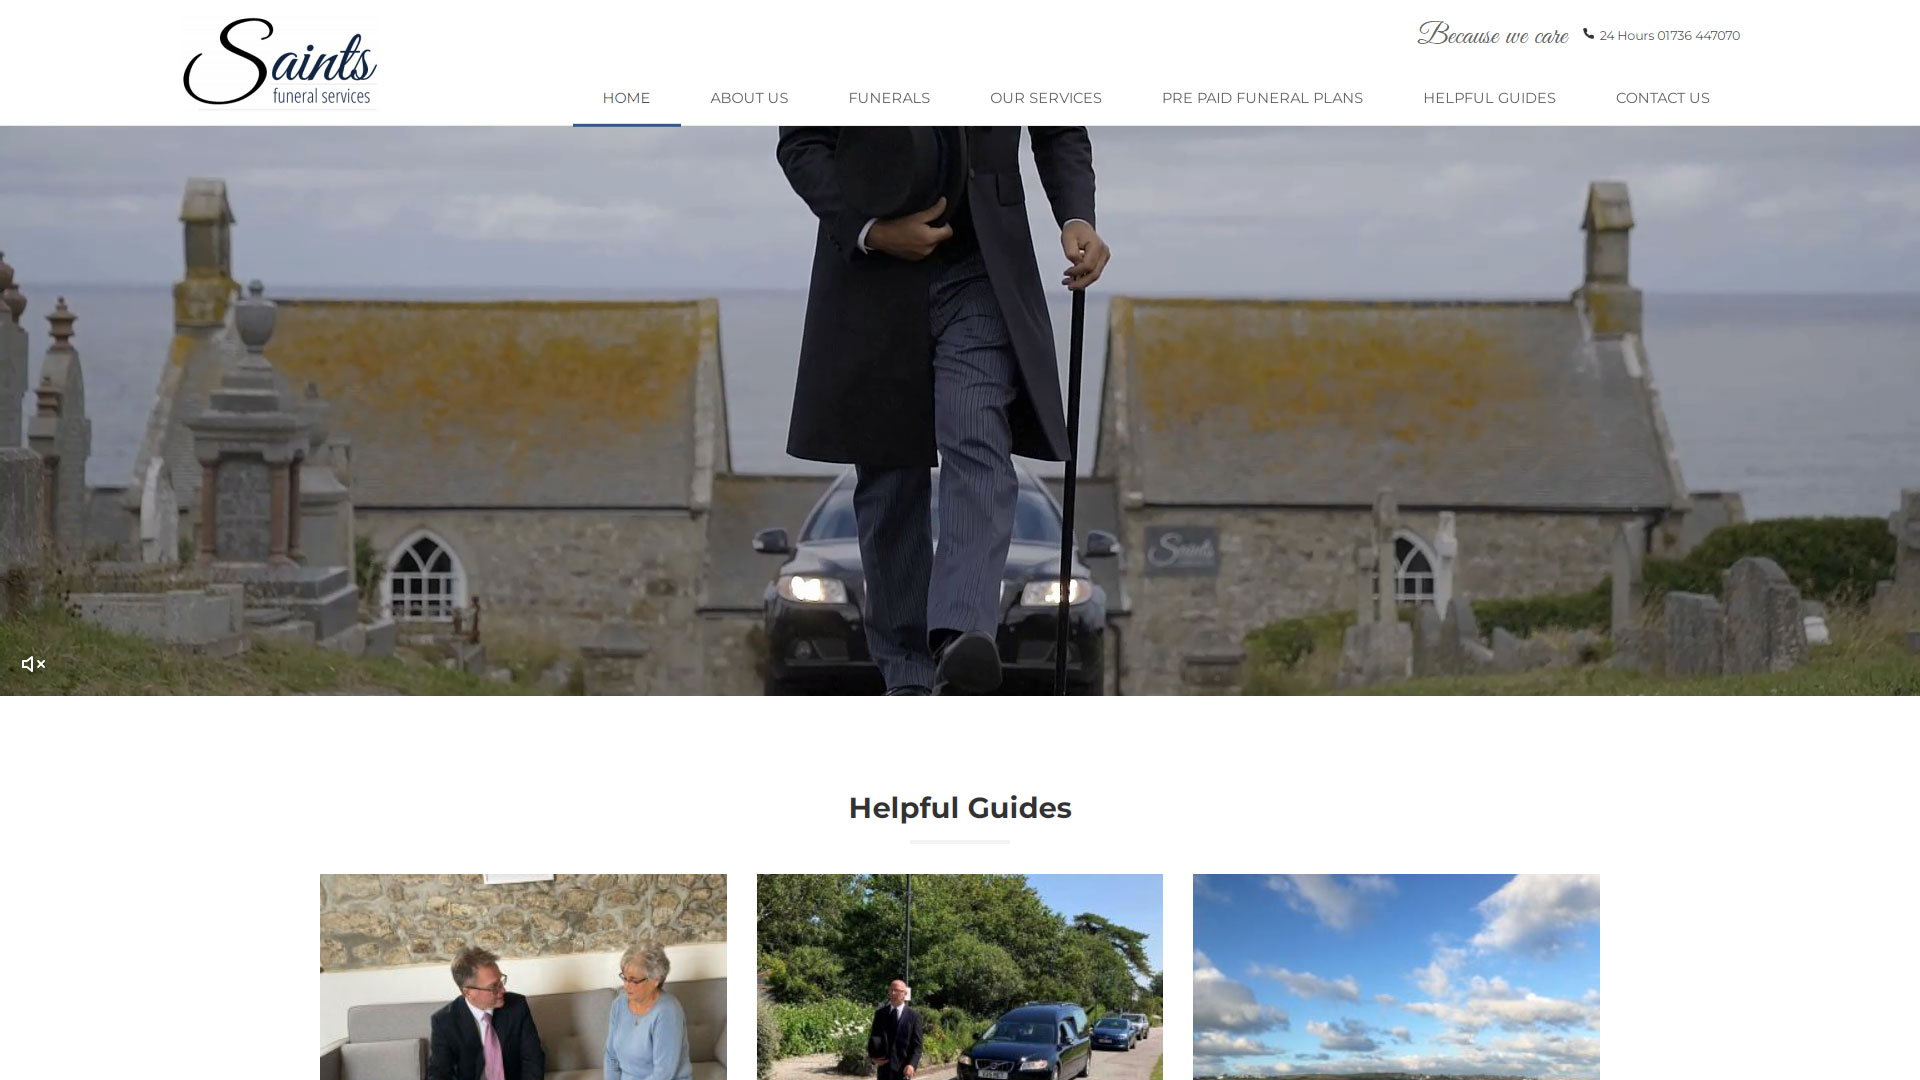 Saints funerals home page as displayed on a p.c